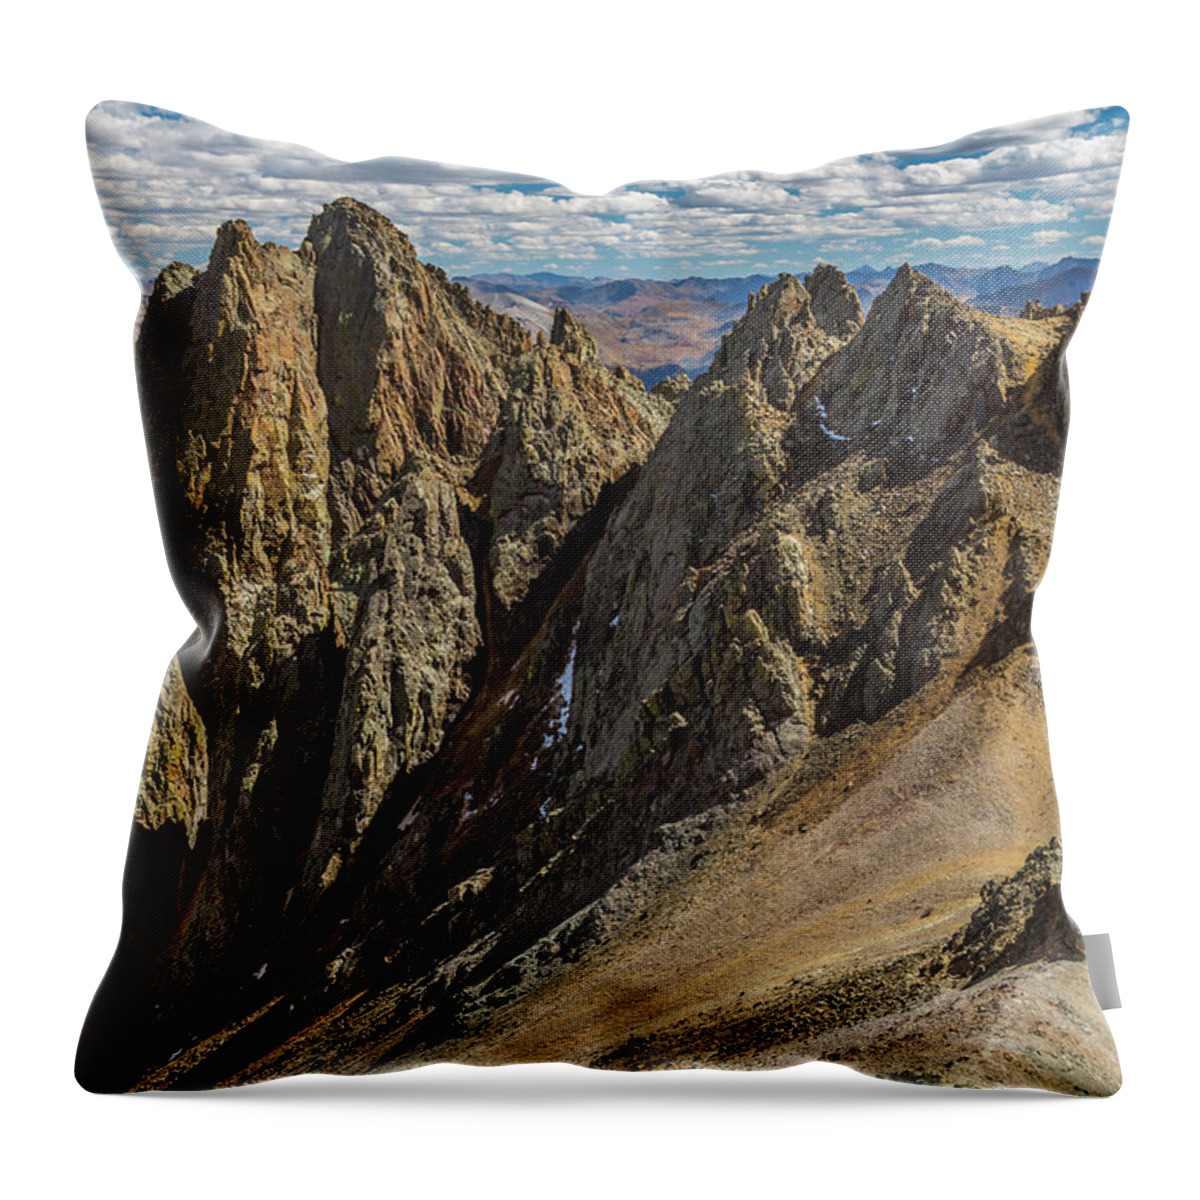 Mt Sneffels Throw Pillow featuring the photograph Saddle Up by Jen Manganello